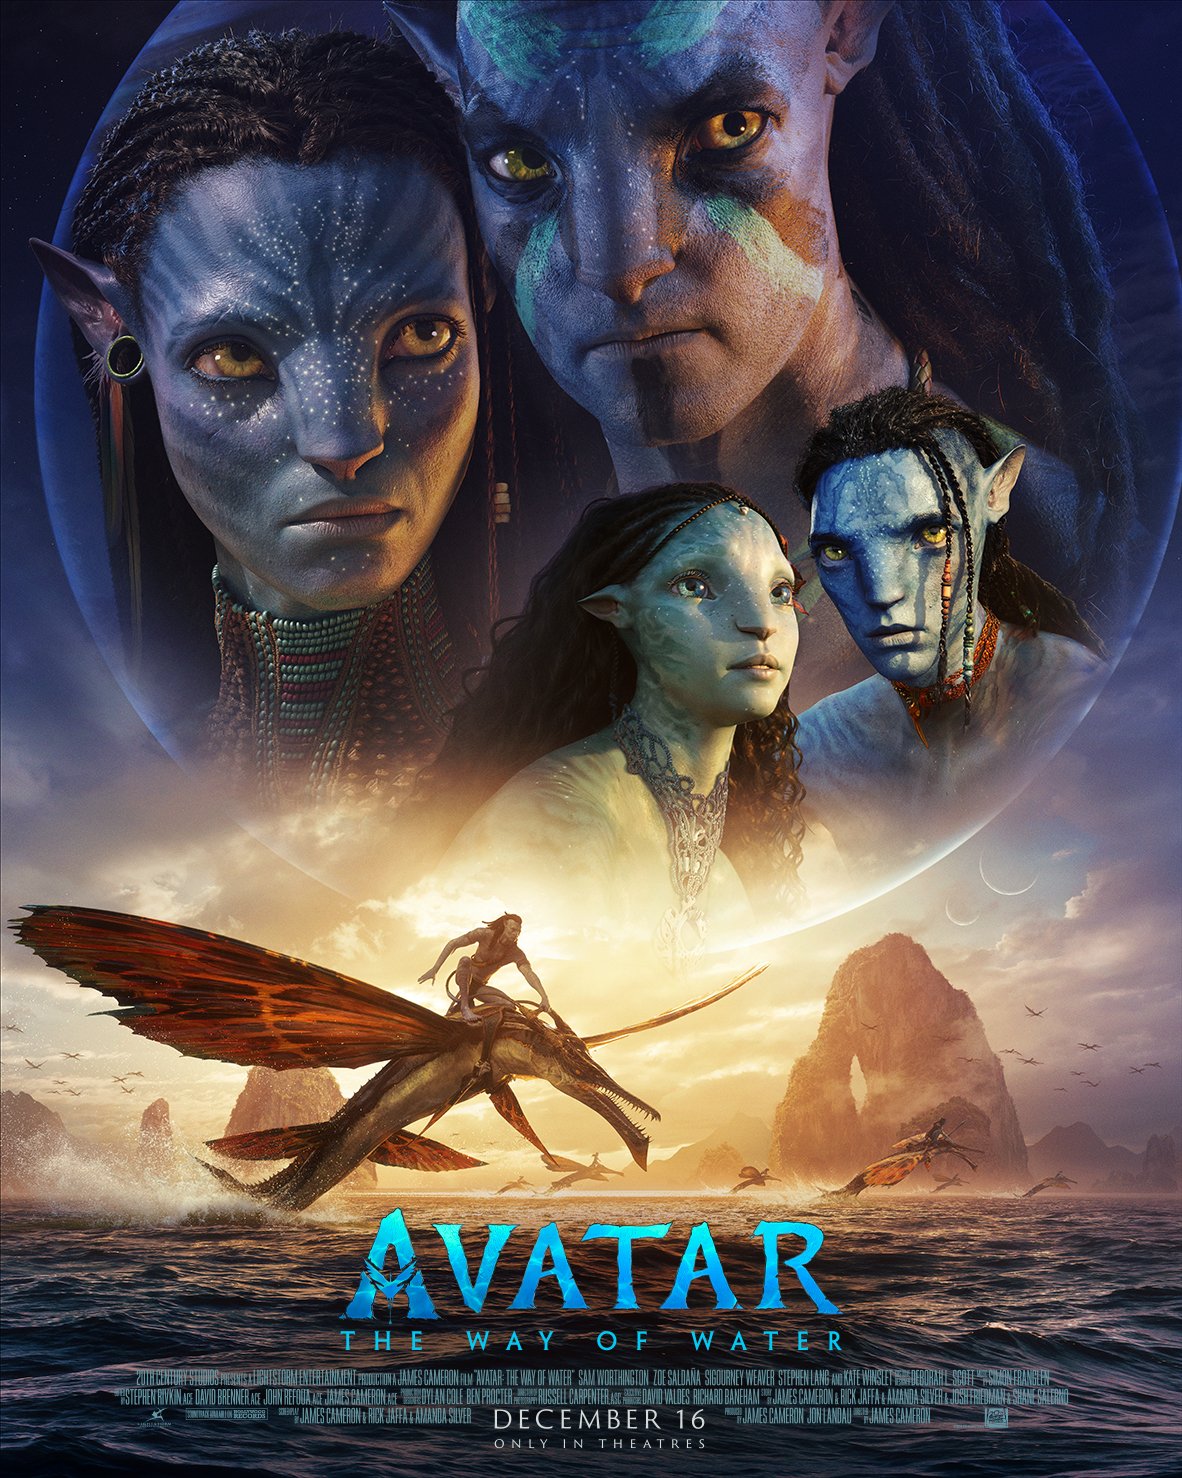 Nouvelle affiche pour "Avatar : The Way Of Water"